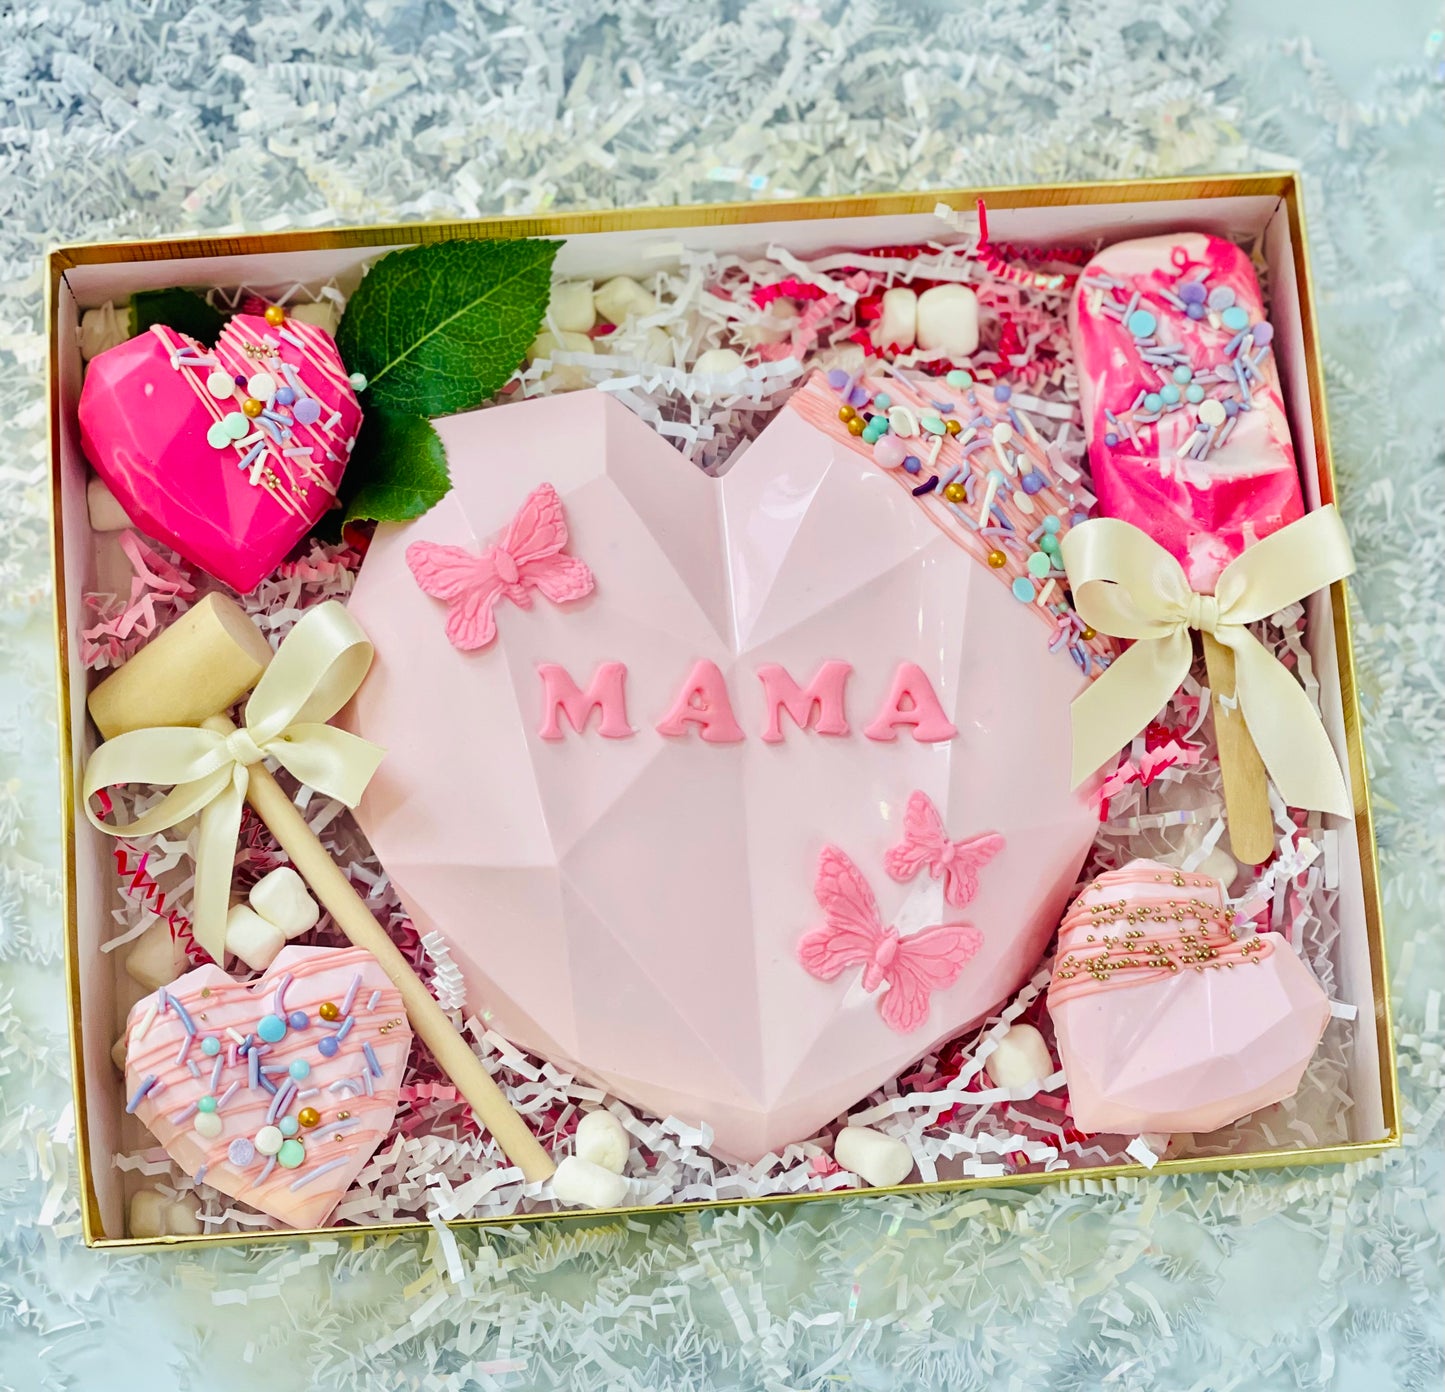 Mother's day gift, best mom, breakable Mother's day gift box, Chocolate Heart, Smash Heart, mother's Day Breakable heart, mother's day sweet treats, mom gift ideas, mother's day heart, sugar cookies, gift, 